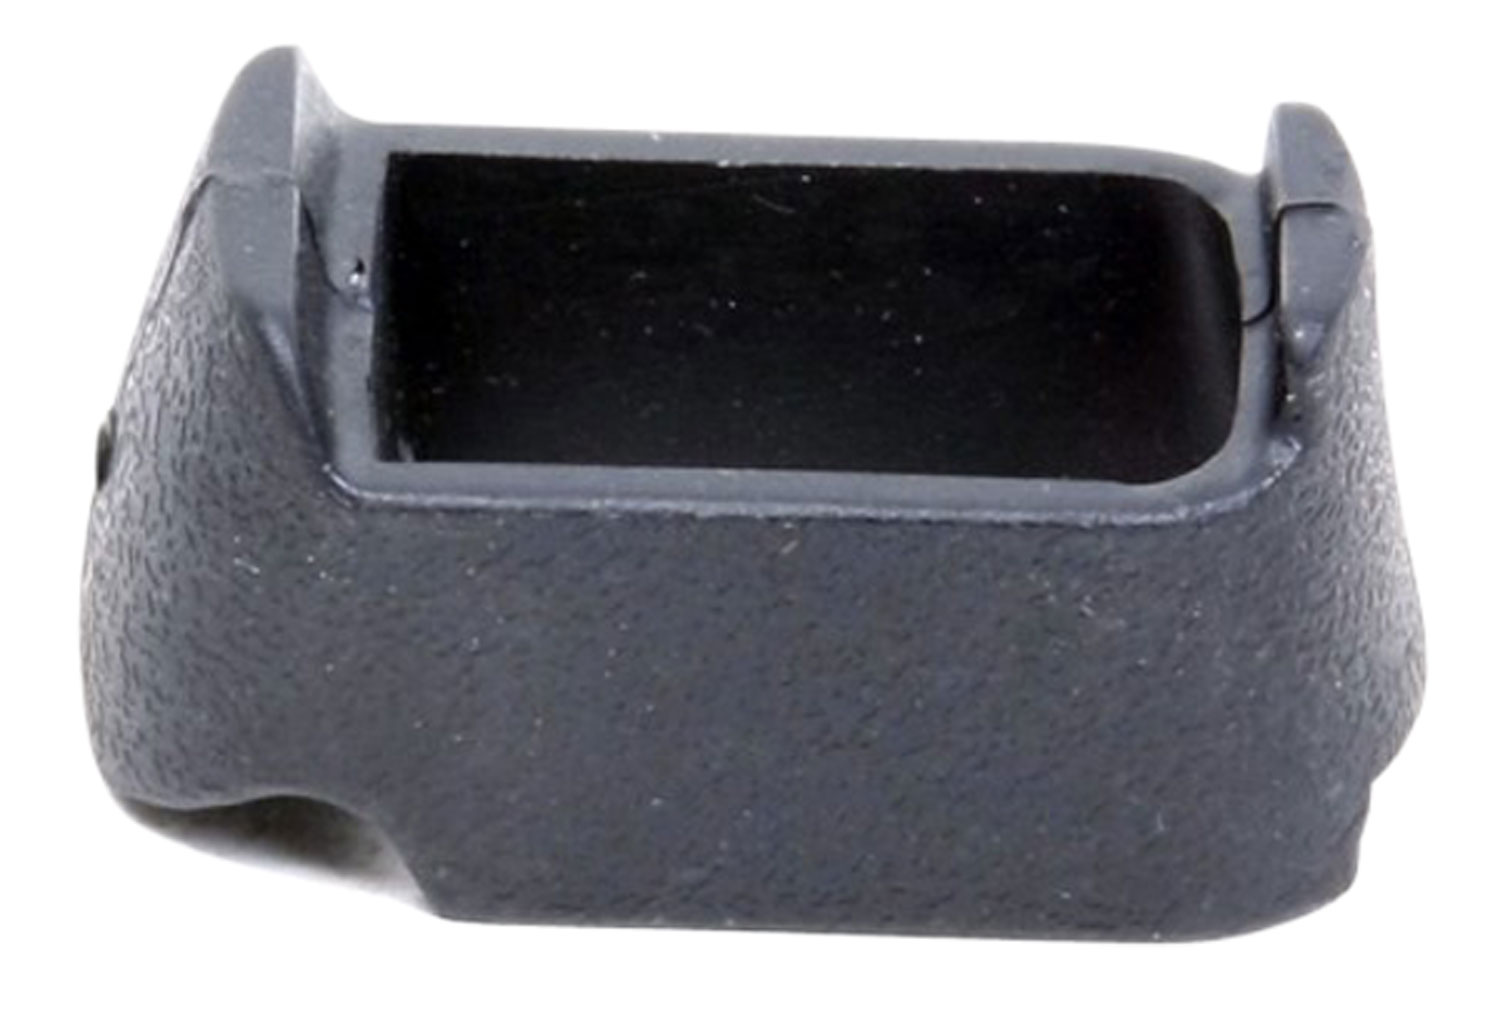 ProMag PM089 Magazine Spacer  Firearm Fit Glock 26/27 Copatible w/Glock 19/23 Magazines, Black Textured Polymer